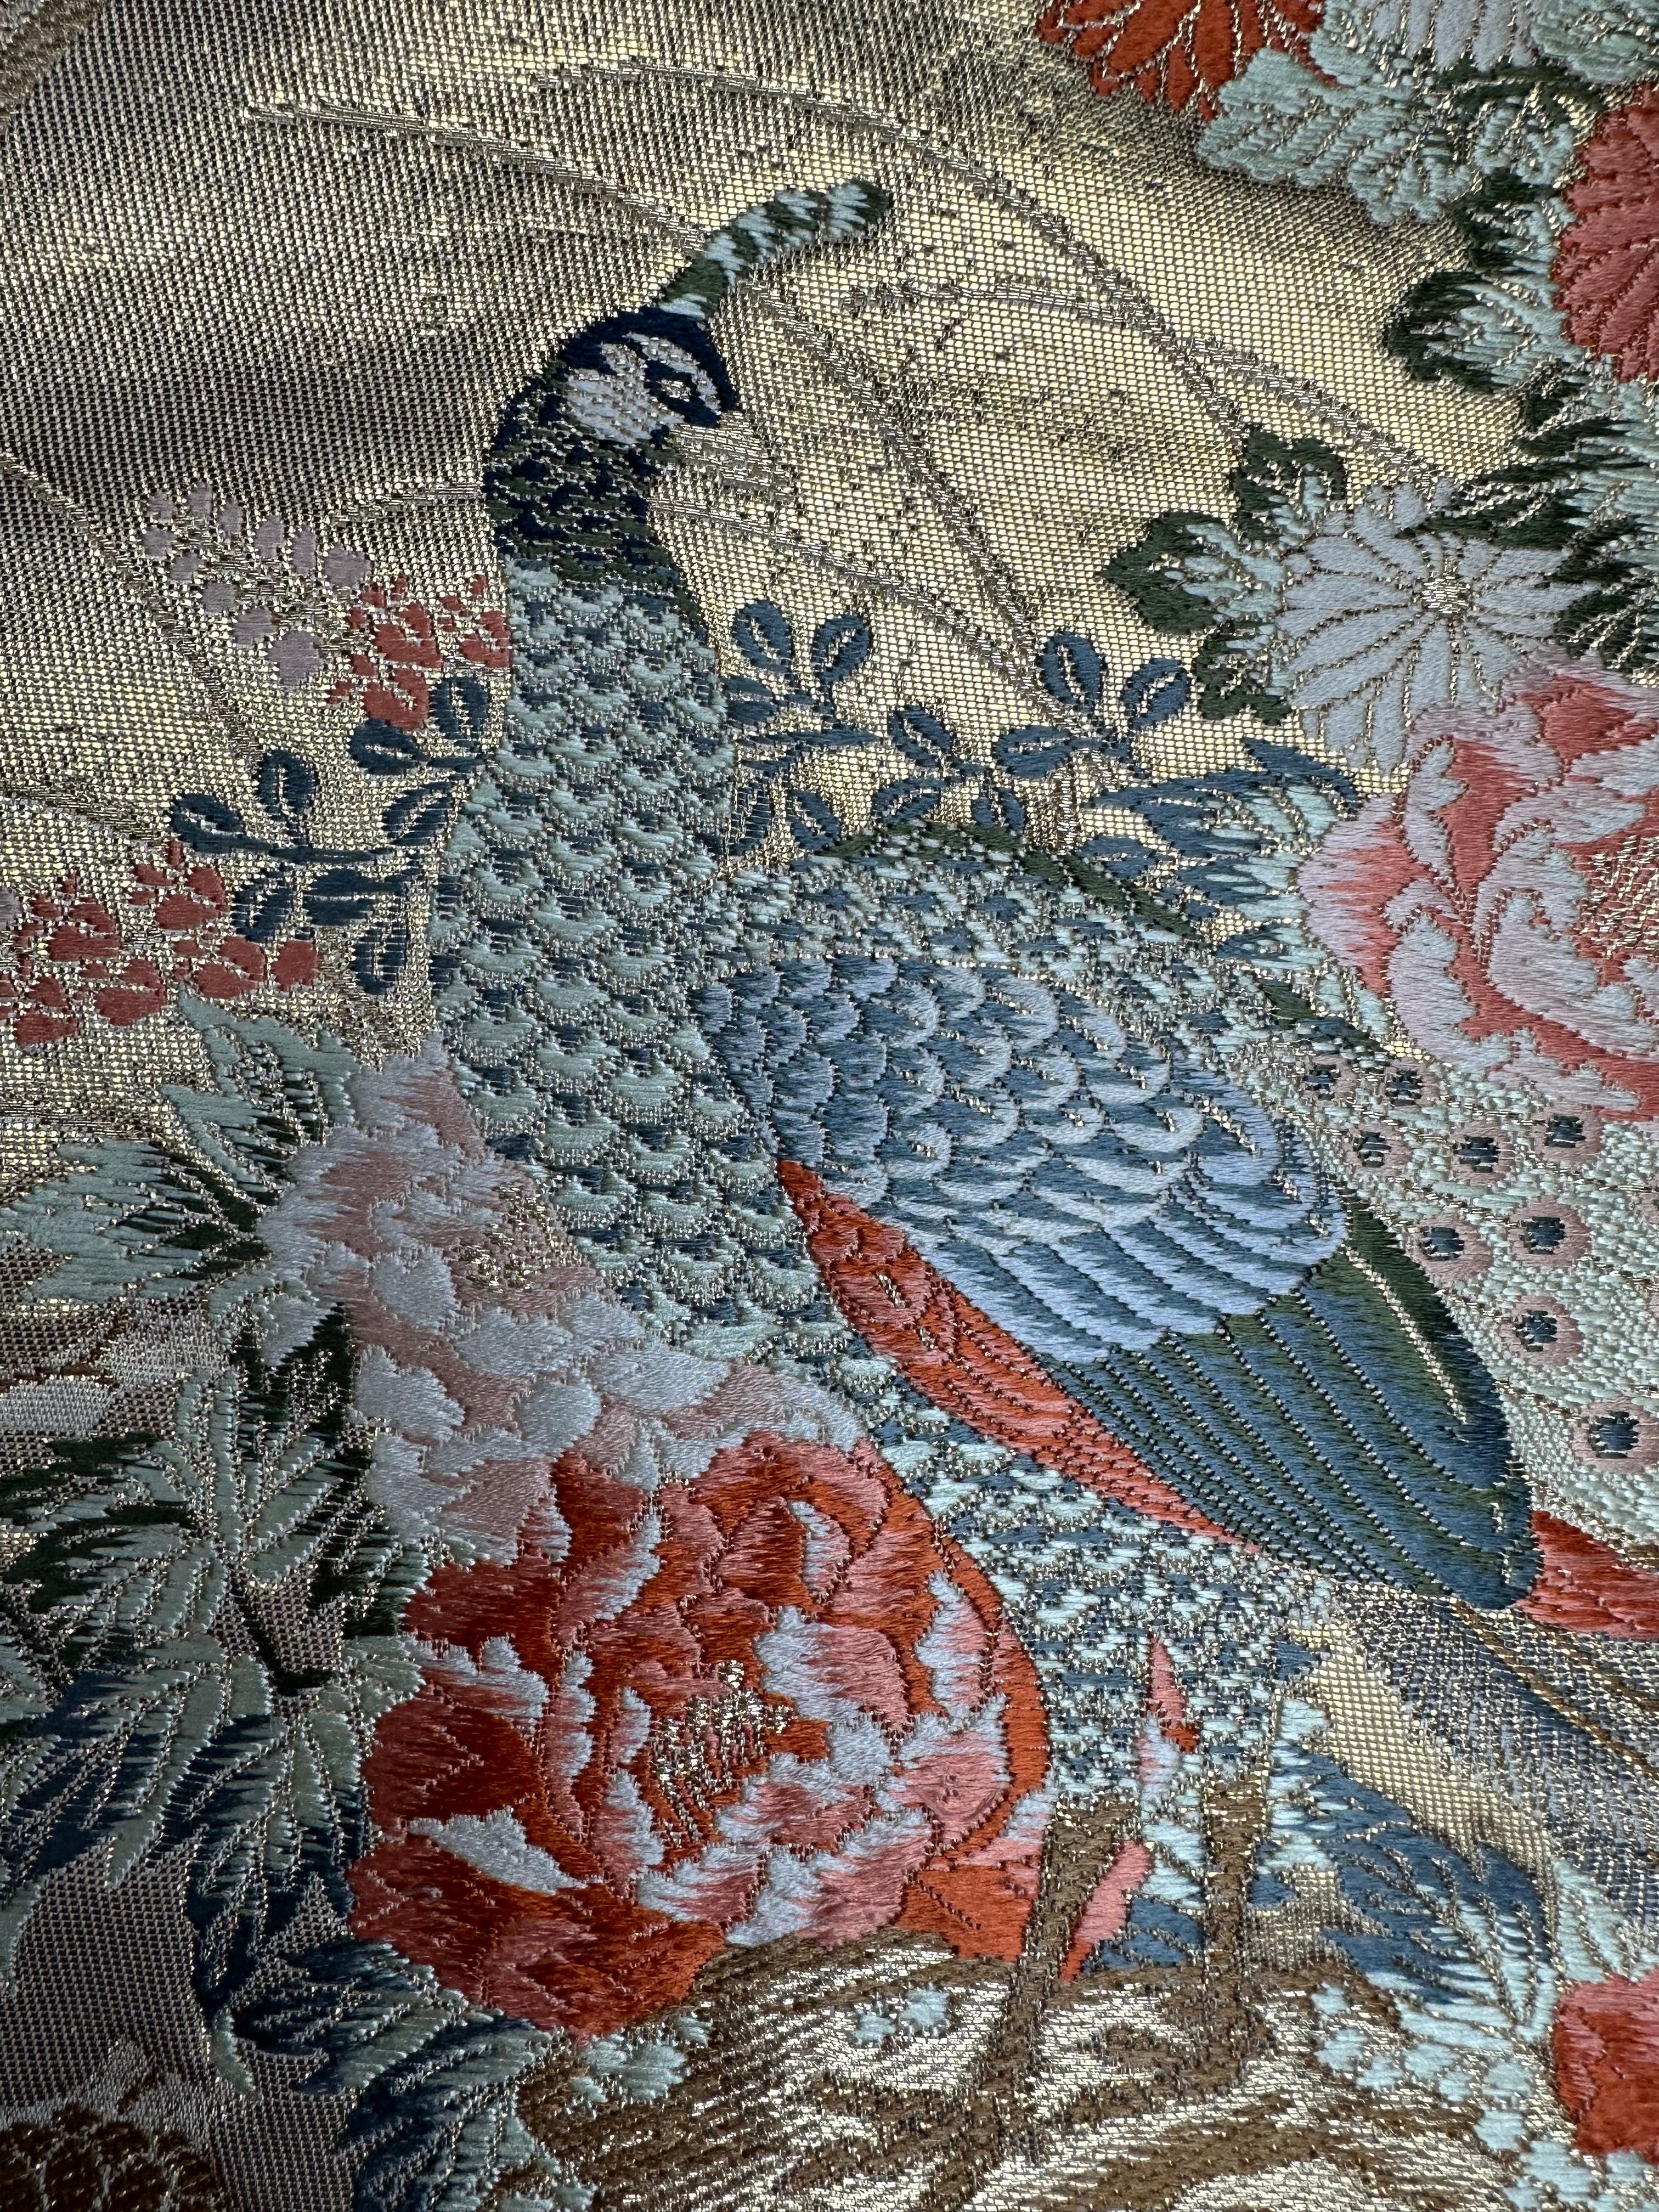 Hand-Crafted Japanese Kimono Art / Kimono Wall Art, the Queen of Peacocks For Sale